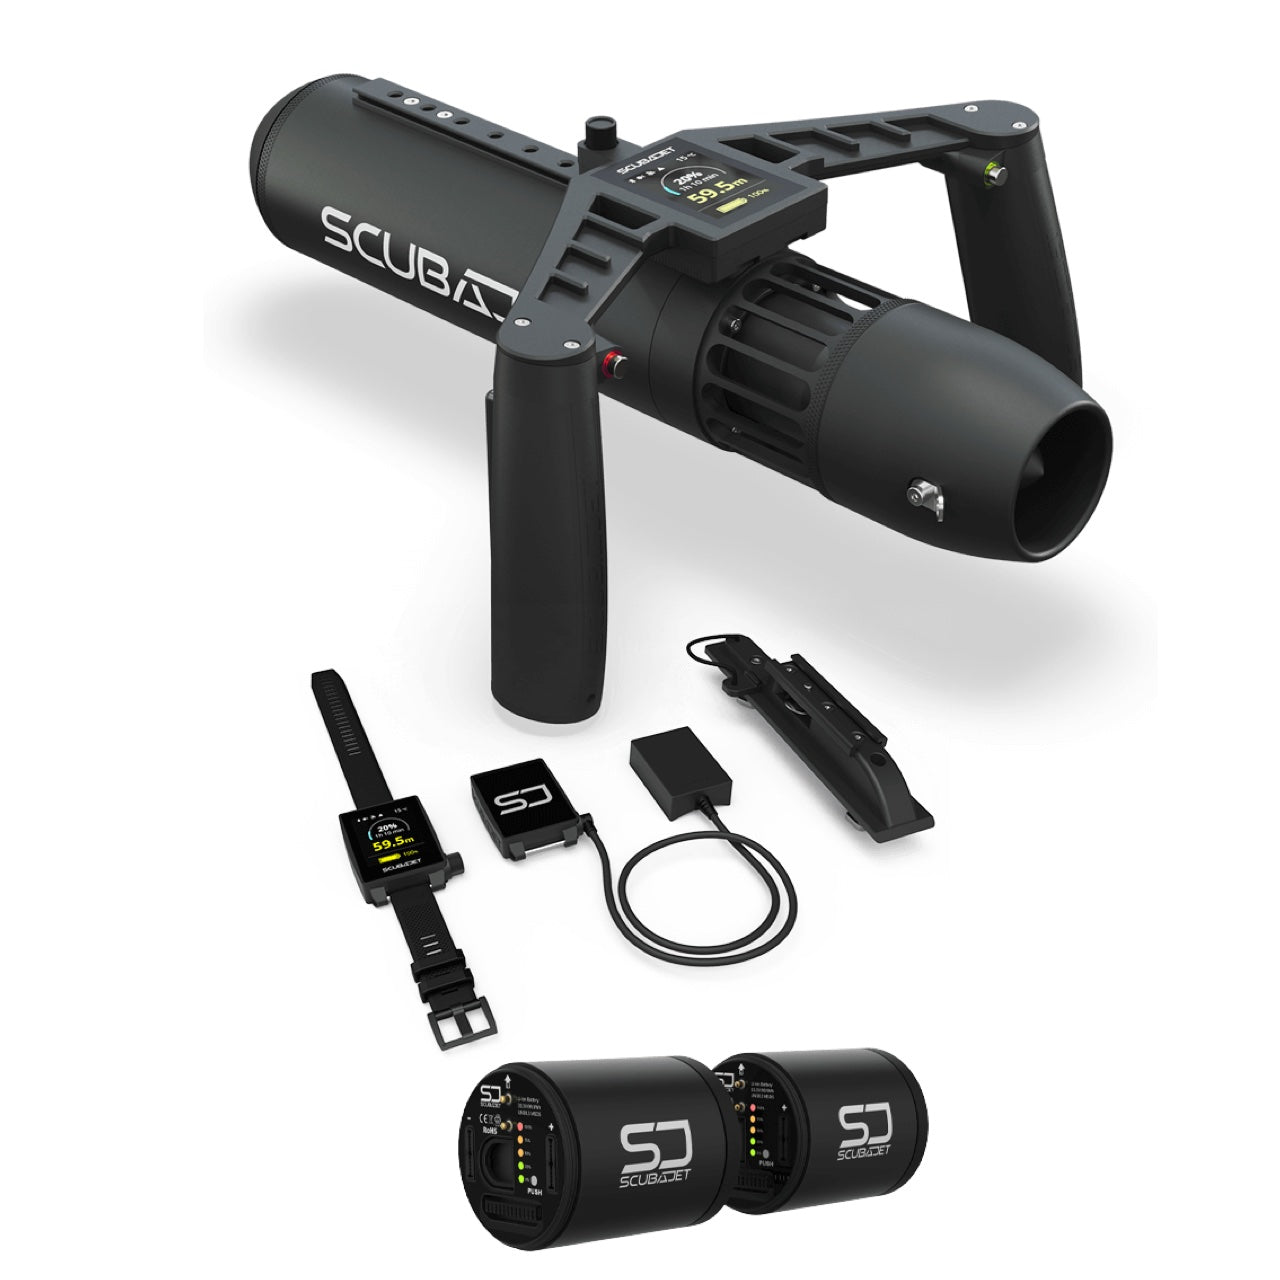 ScubaJet Pro All In One Kit. Show the all black ScubaJet pro with silver stenciled logo. The underwater kit hand controller is attached and the the overwater kit for kayak and paddleboard motors is below. 2 batteries are at the bottom of the image.